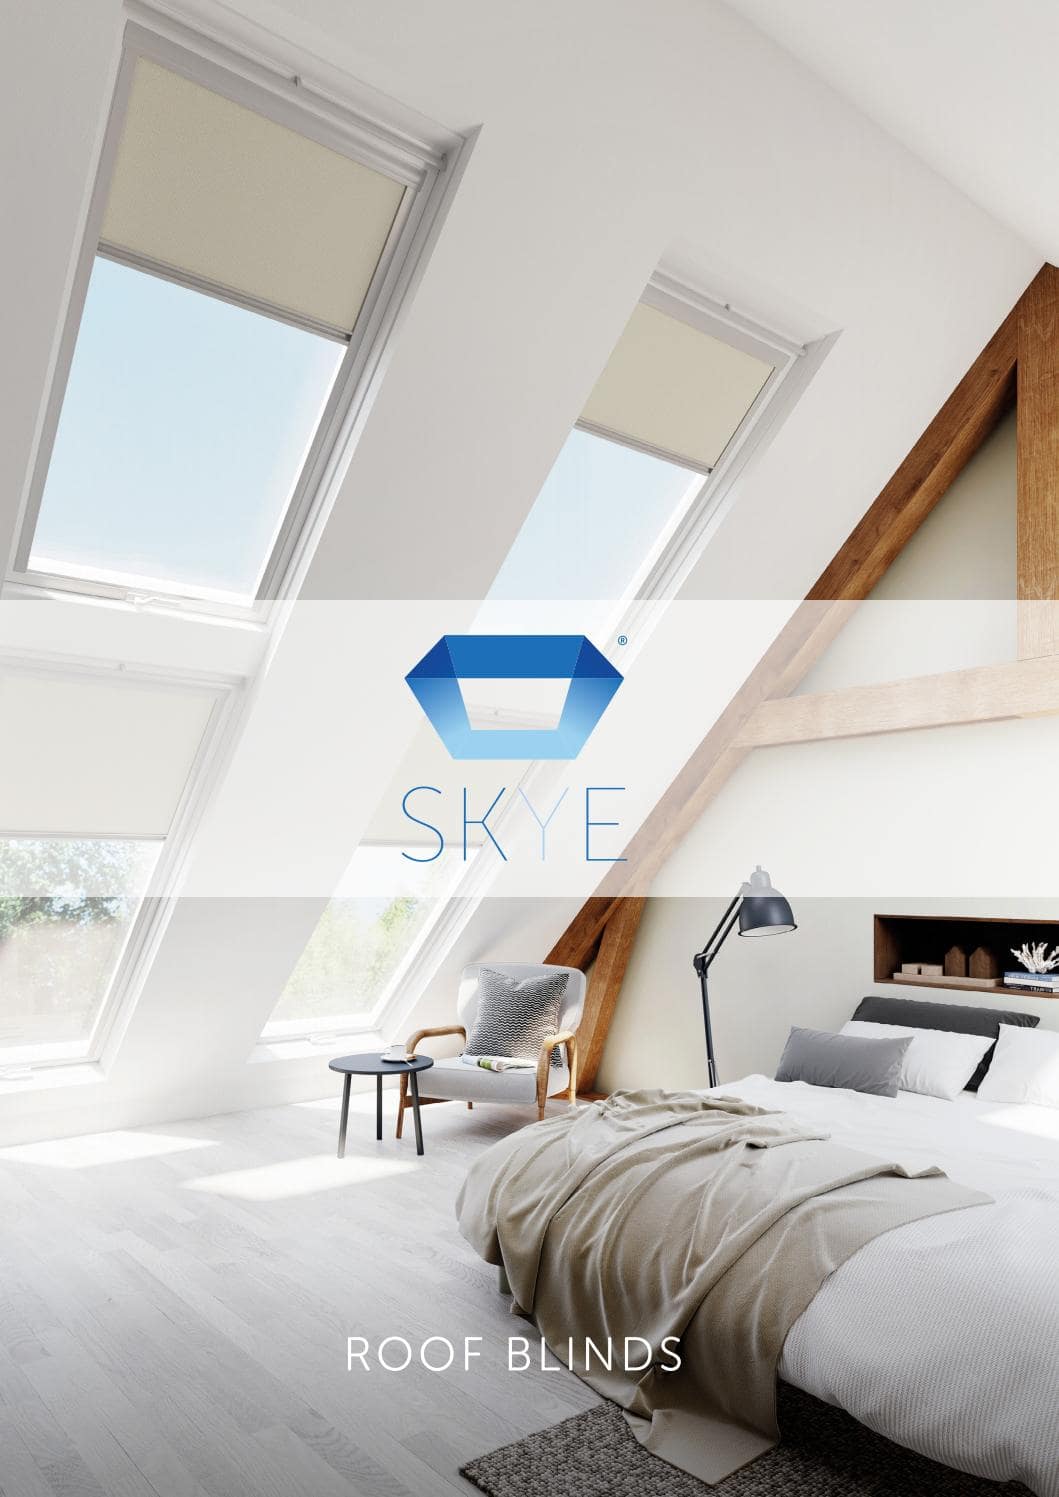 Velux, Fakro, Roof Blinds, Supply and Installation